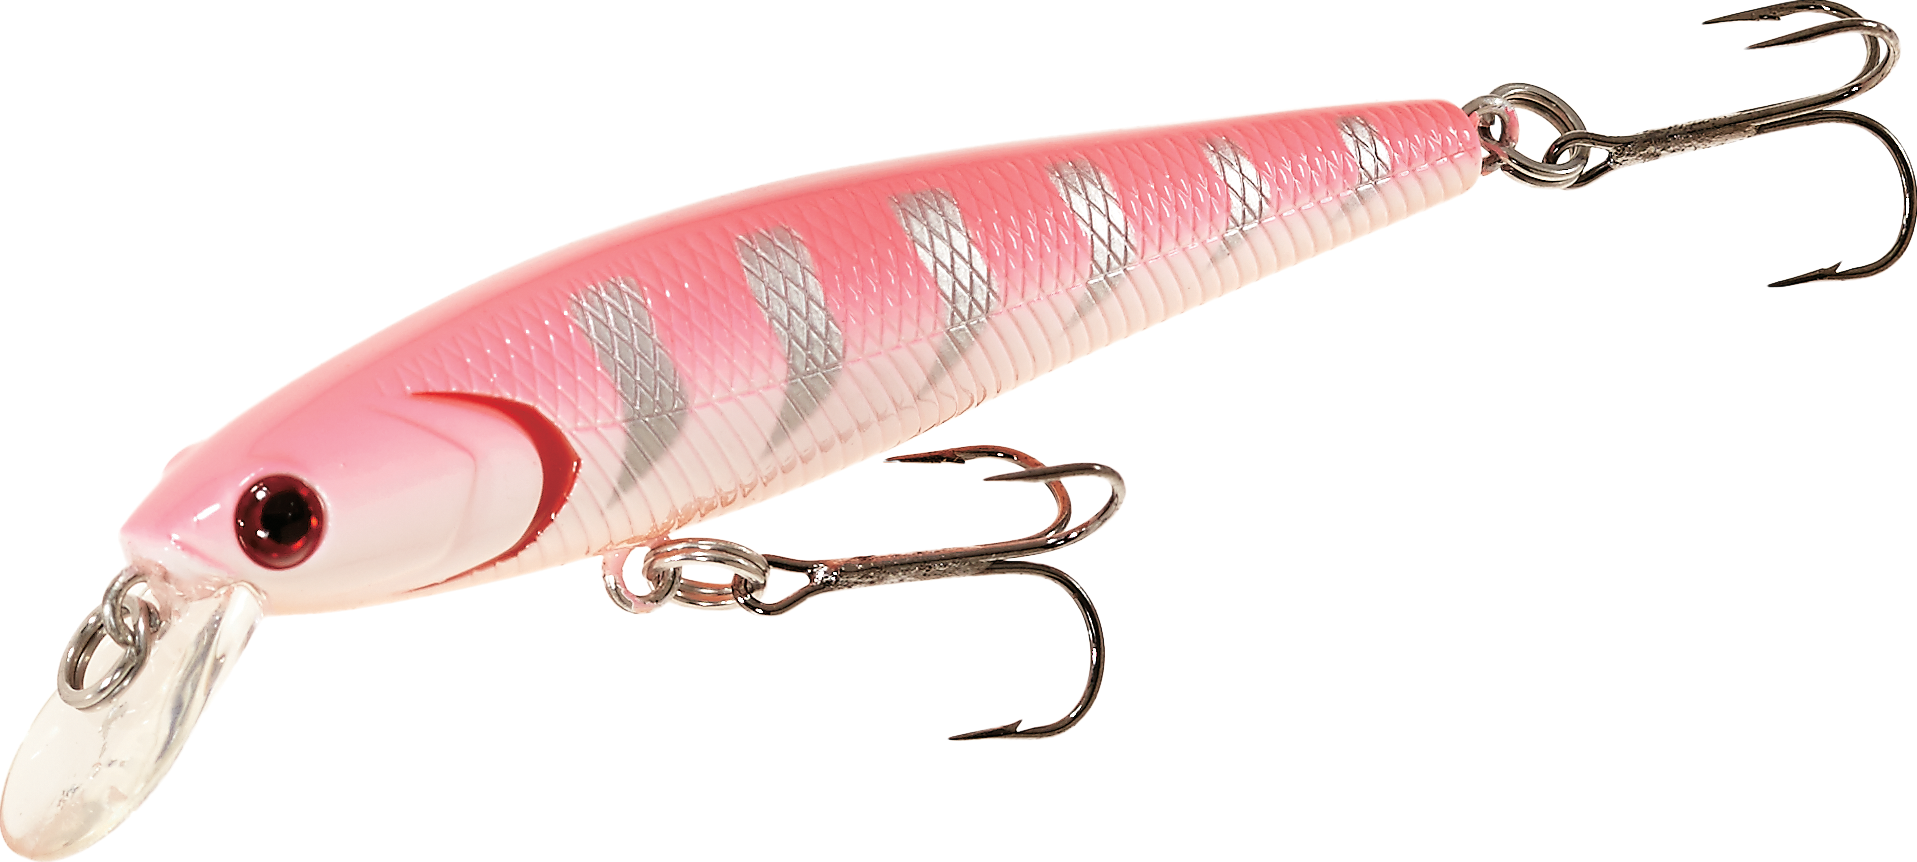 Jakes Lures -Spin A lure -1/16 oz Salmon, Steelhead, Trout - 2 Baits -  Tackle